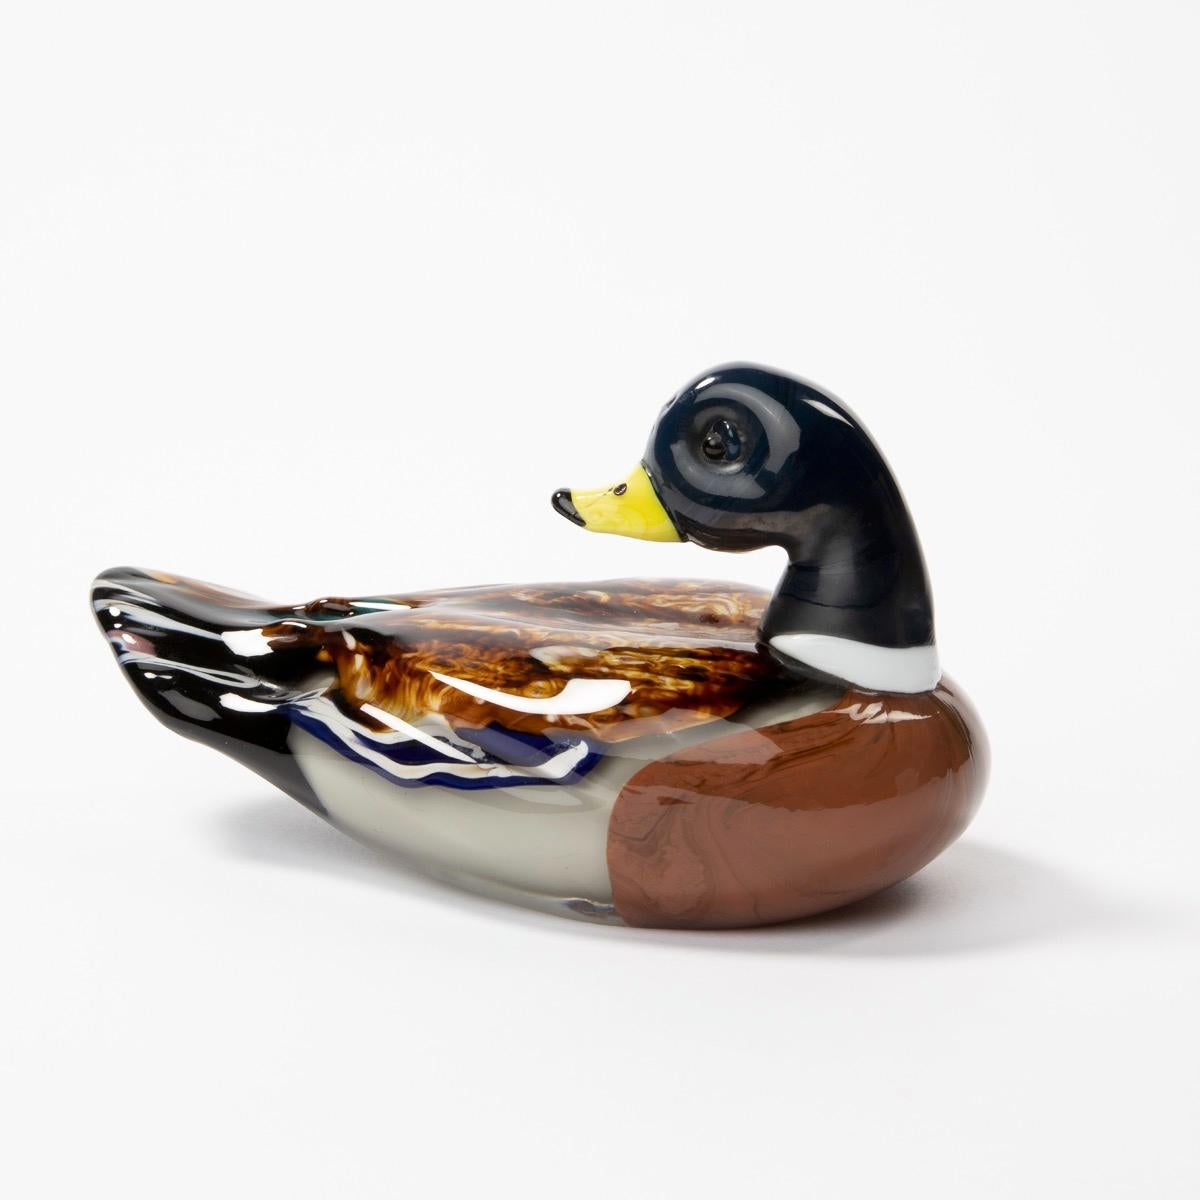 Sculptures by Toni Zuccheri represents a couple of ducks in polychrome glass with a subtle blend of colors for deep details.

We are located in Belgium, we present Postwar decorative arts with an emphasis on line Vautrin, French decorators (Adnet,